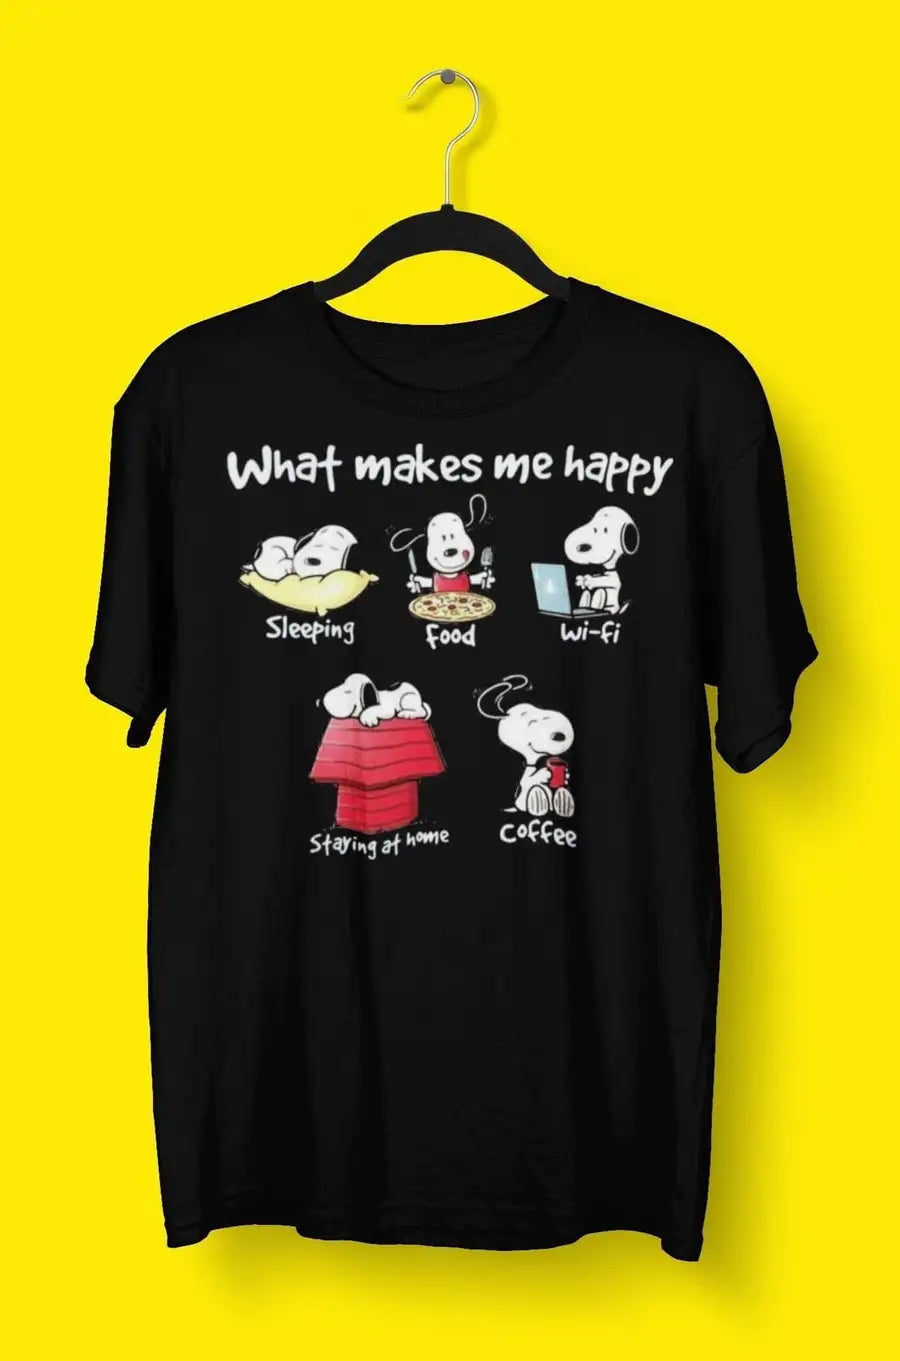 What Makes Me Happy Custom T Shirt for Men | Premium Design | Catch My Drift India - Catch My Drift India Clothing black, clothing, dog, engineer, engineering, made in india, shirt, t shirt, 